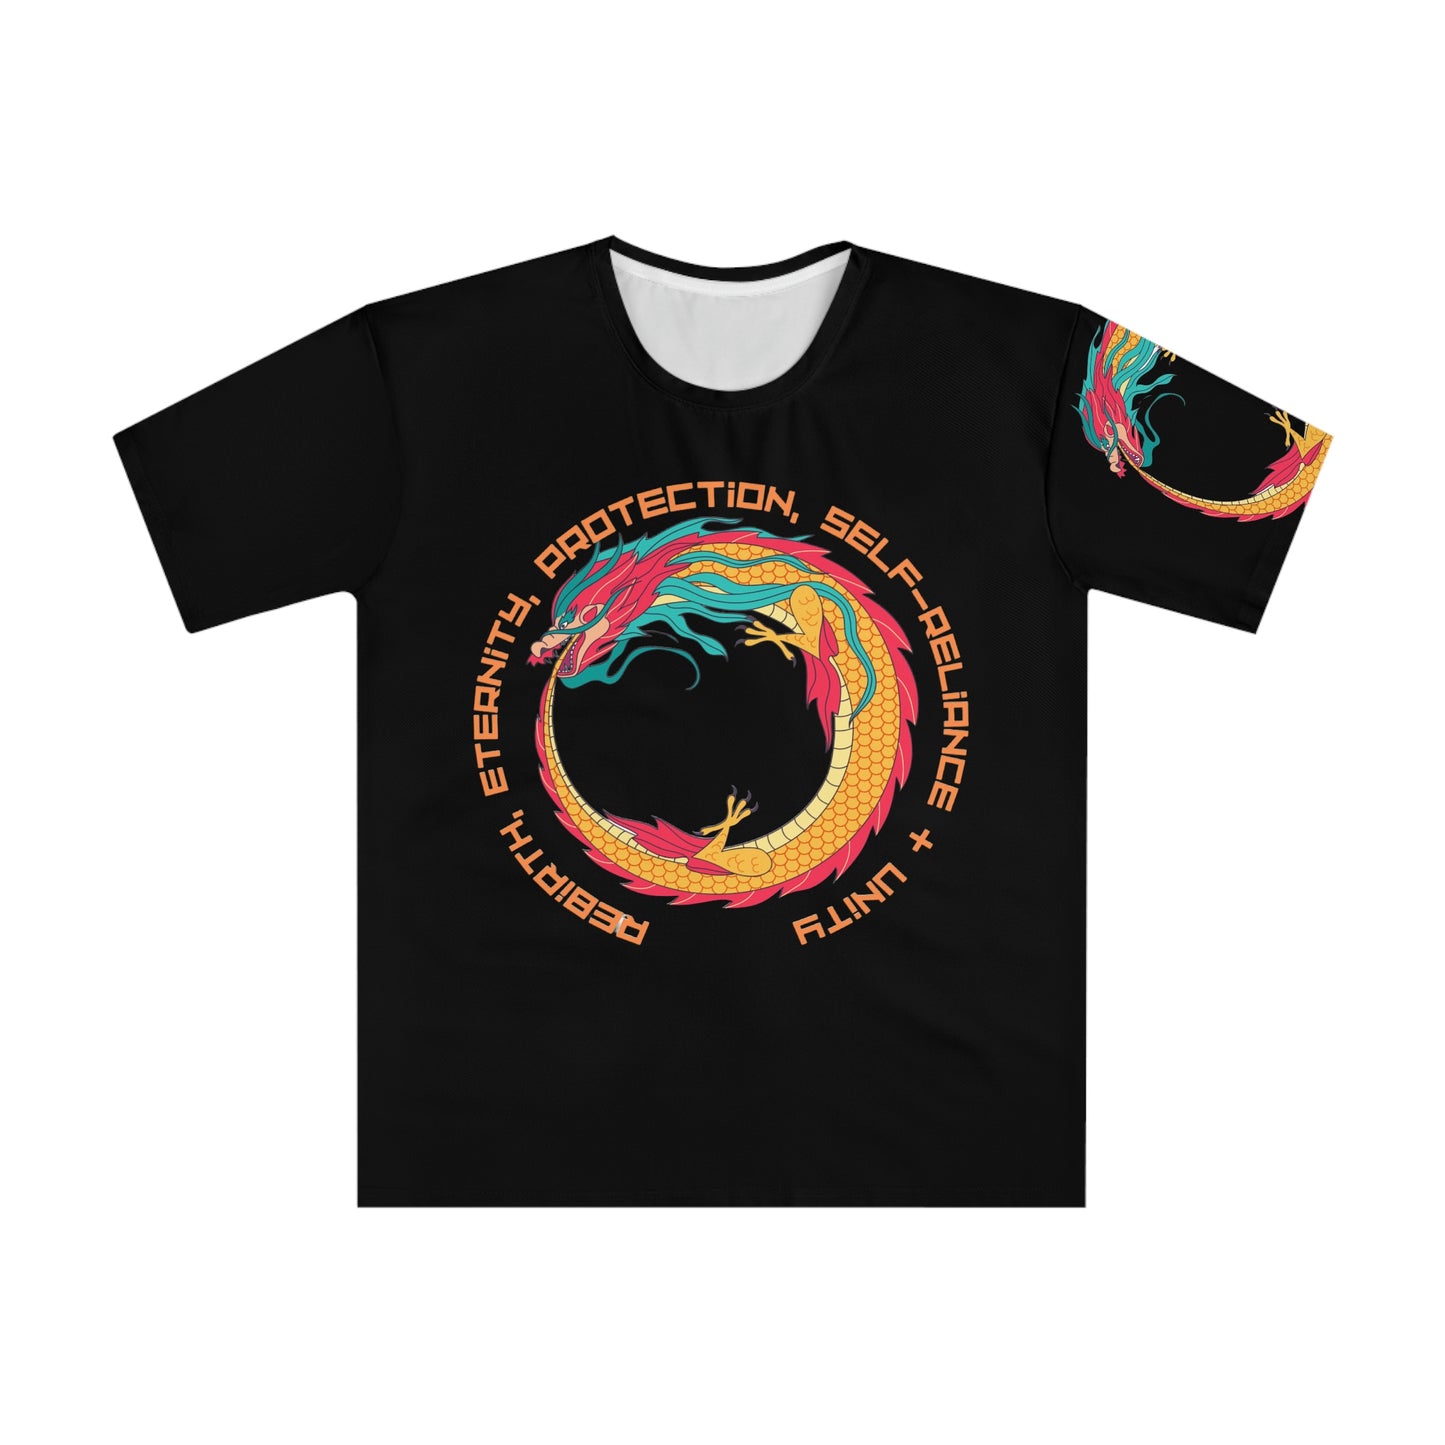 ‘The Ouroboros’ symbol of rebirth, eternity, protection, self-reliance & unity. Printed Front, Back & One sleeve. Men's Loose T-shirt (AOP)